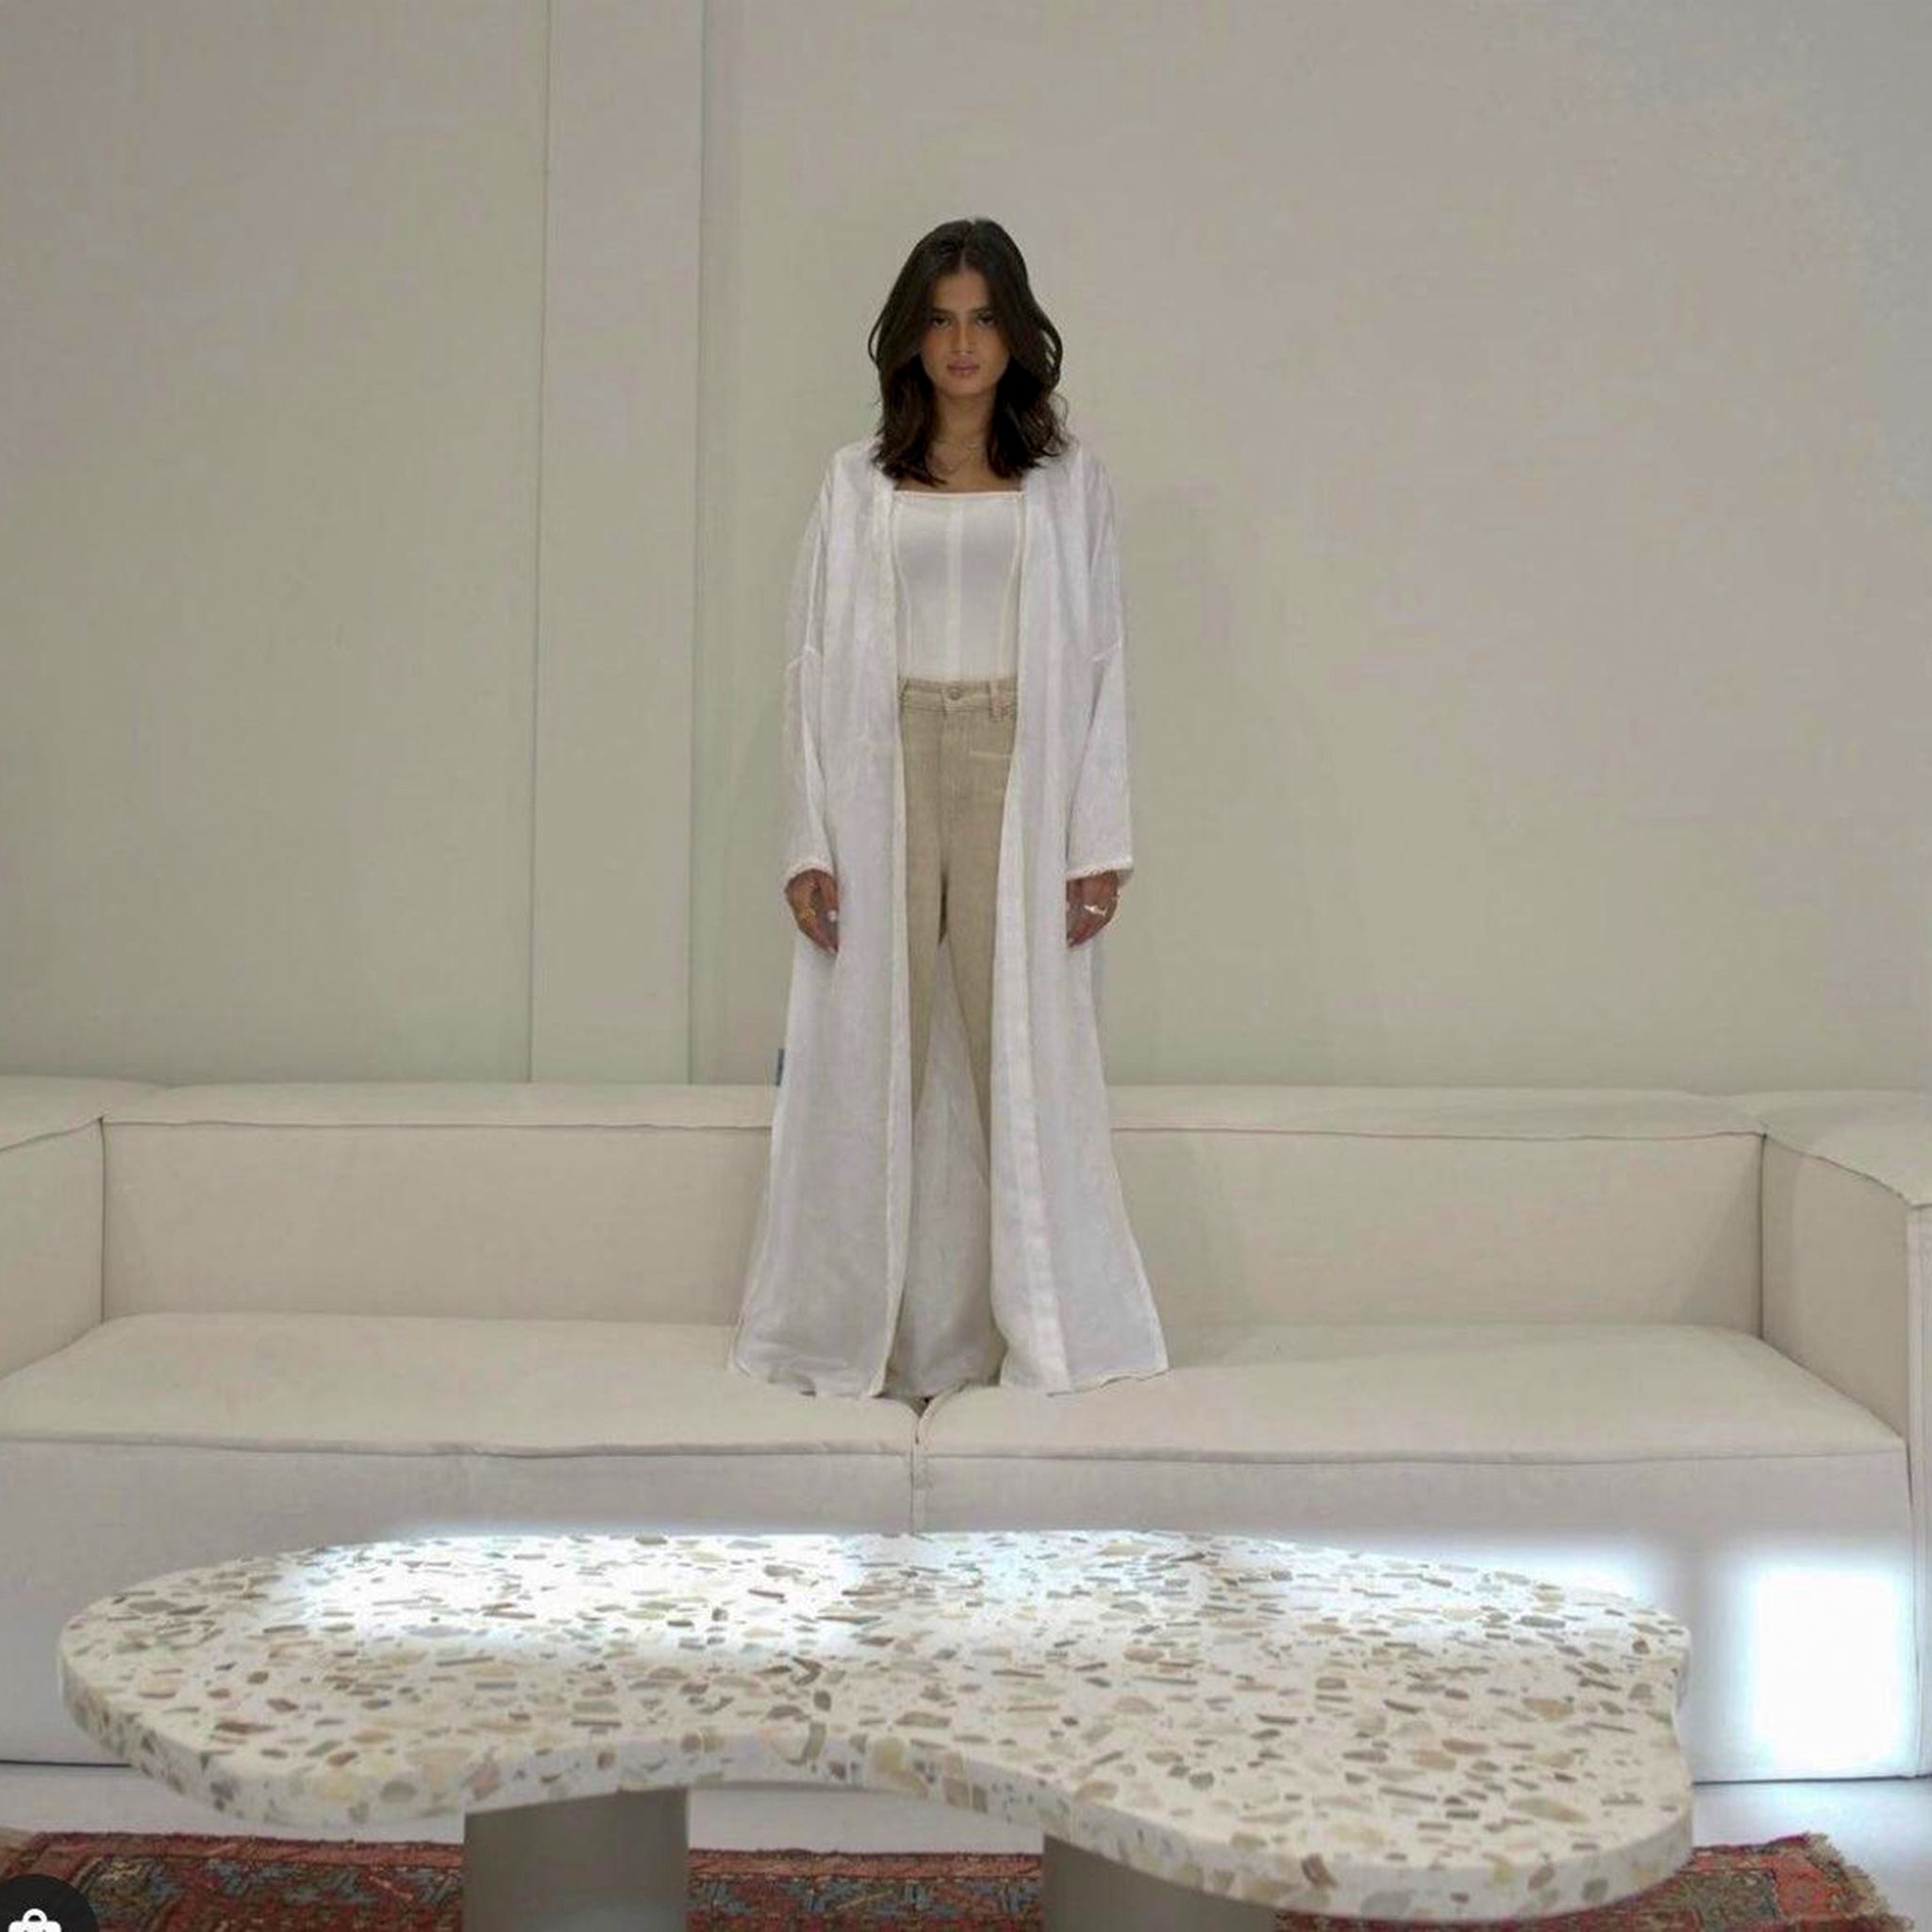 A woman in a white robe stands on a modern white modular couch, with a terrazzo coffee table in the foreground and a minimalist interior setting.